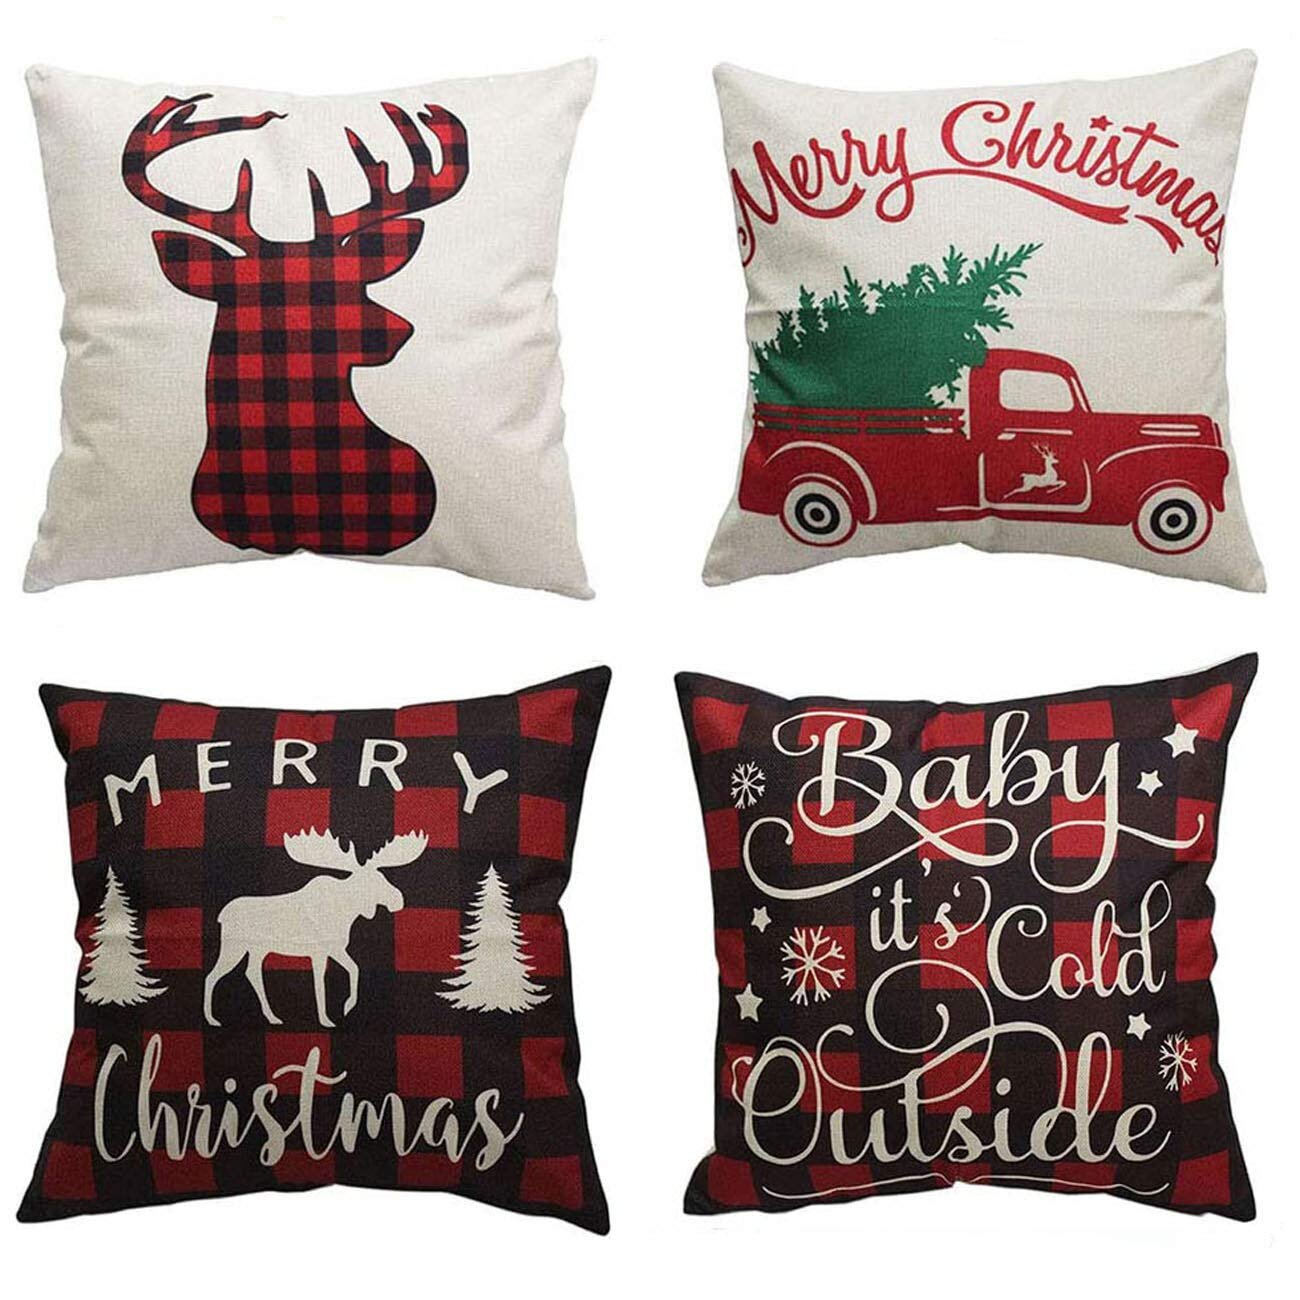 4 Pack Christmas Holiday Pillow Covers 18 x 18 Cushion Cover Case Home Decor New 